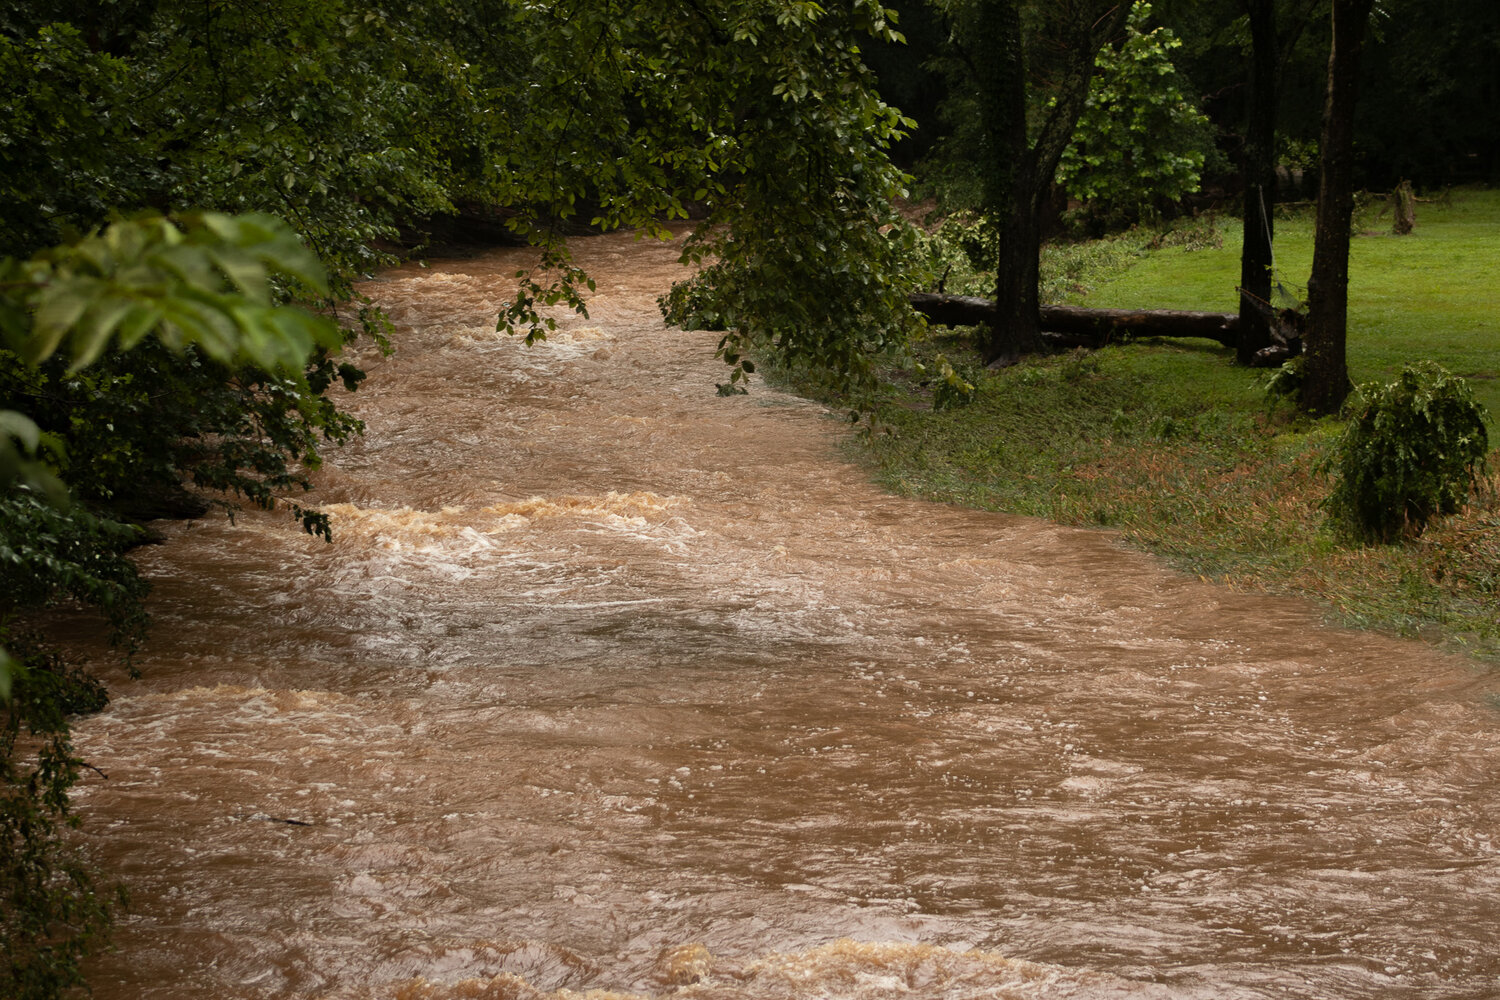 Twelve hours after Saturday’s flash flood along the Houghs Creek in Upper Makefield, the water still rages near the area where five people died Saturday.